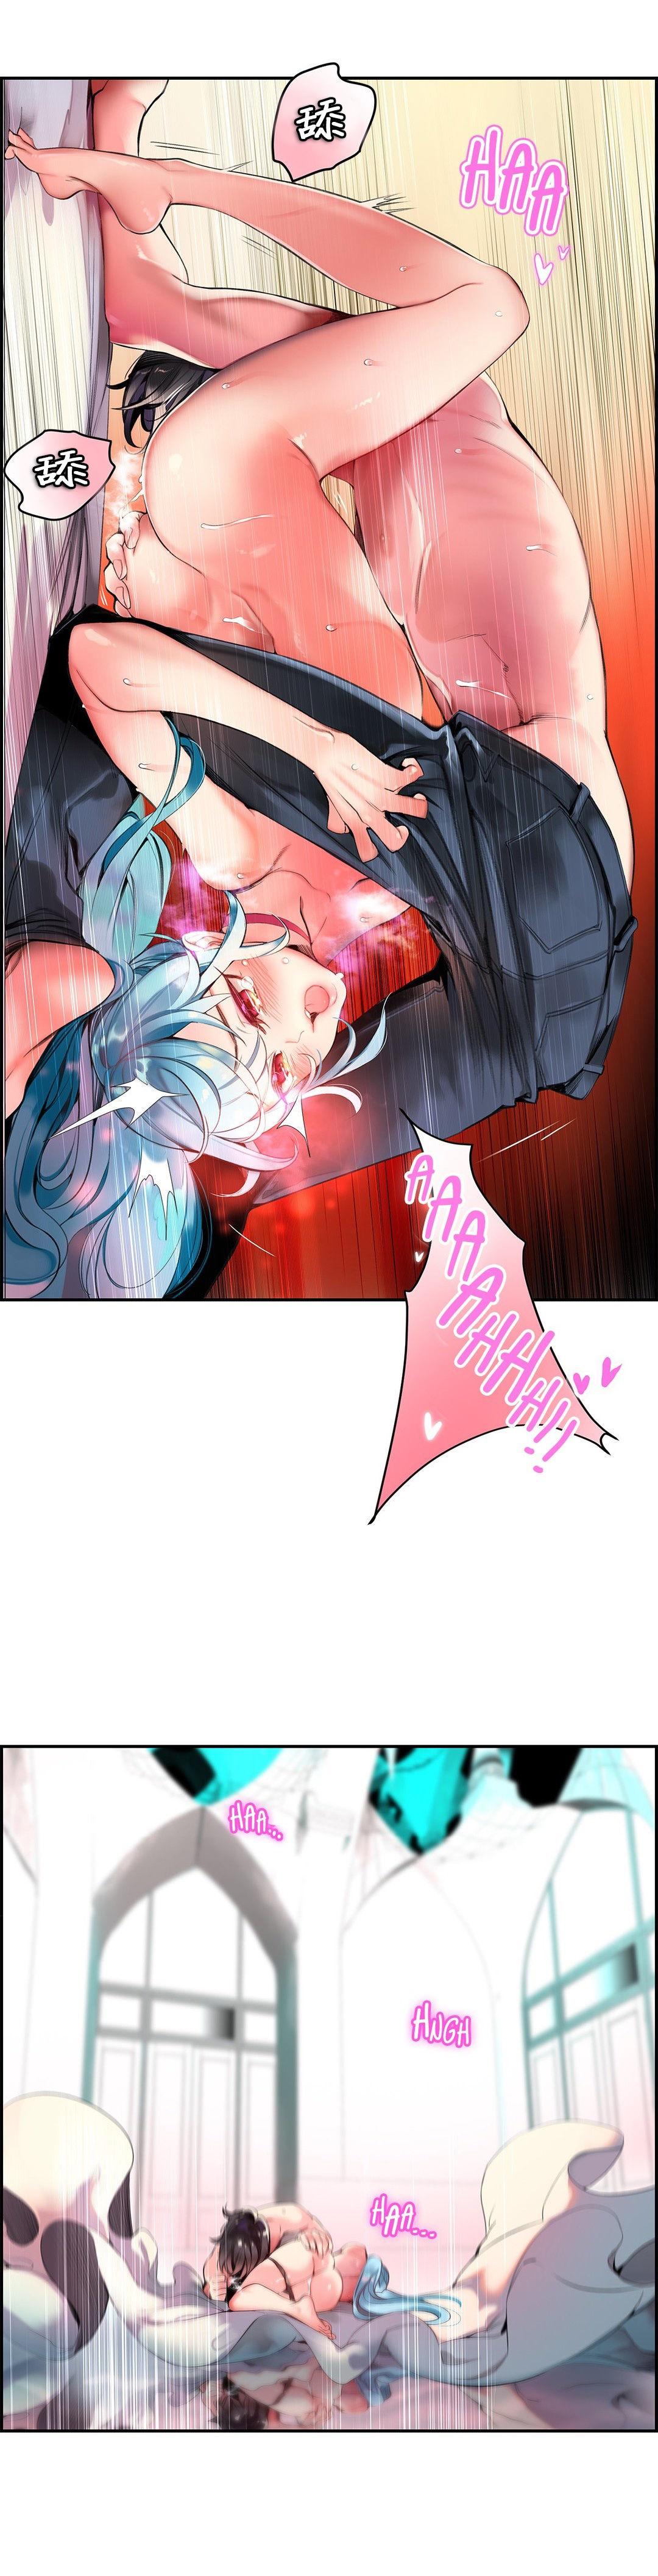 [Juder] Lilith`s Cord (第二季) Ch.61-68 [Chinese] [aaatwist个人汉化] [Ongoing] 168